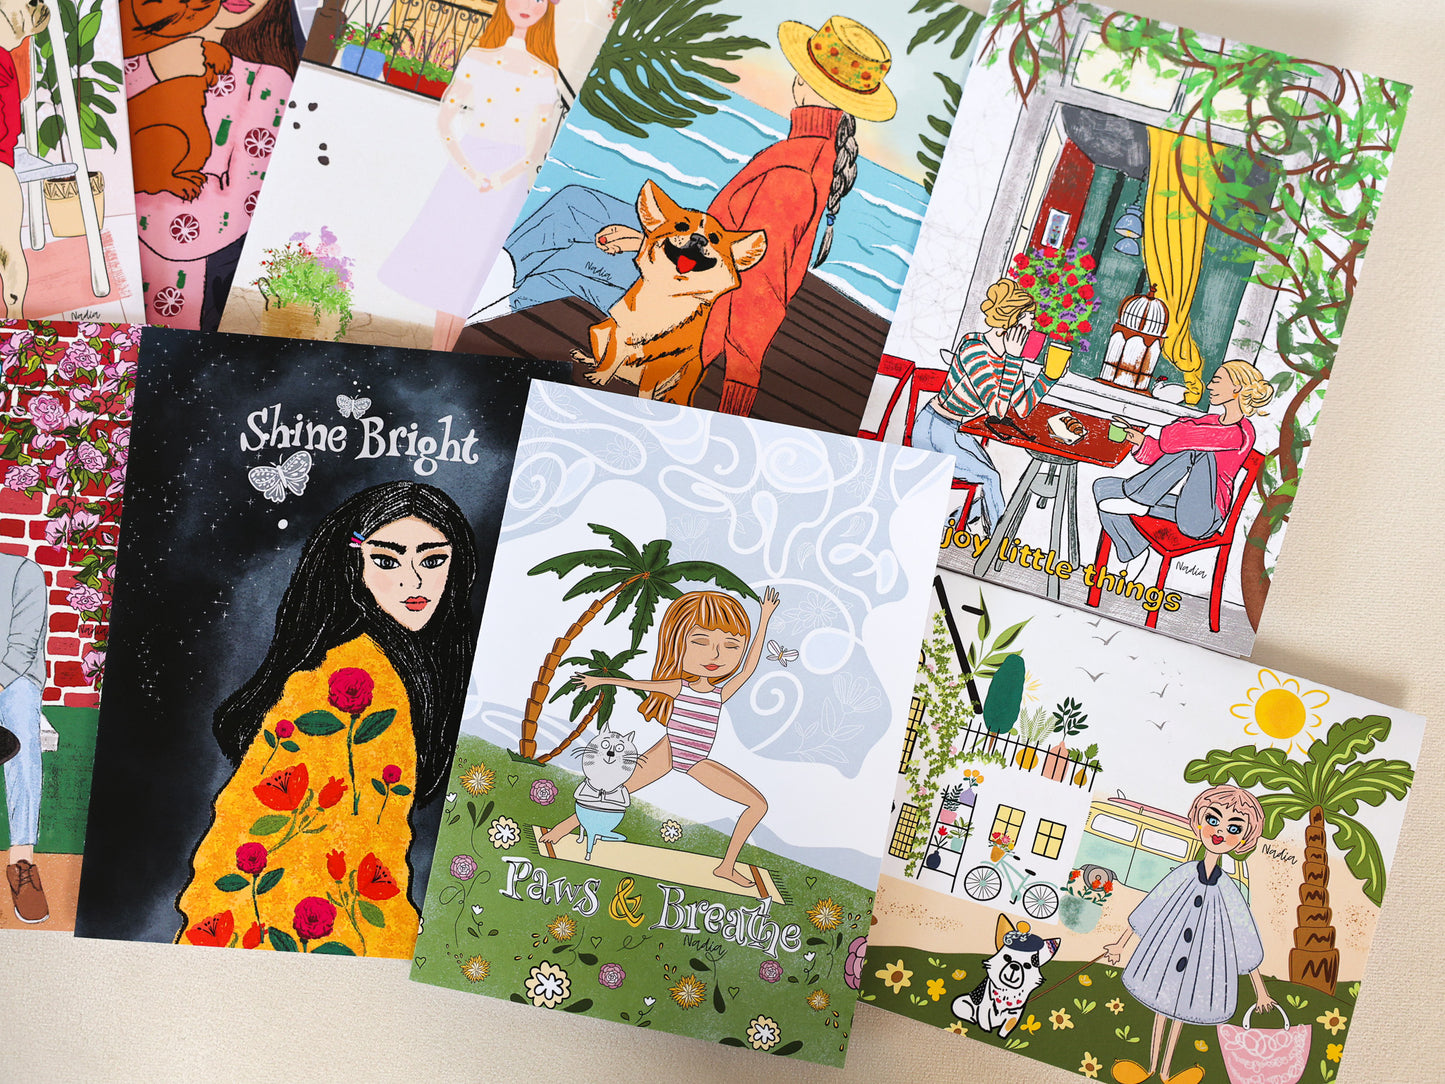 Illustrated boxed set of greeting cards handmade in California by artist Nadia Watts